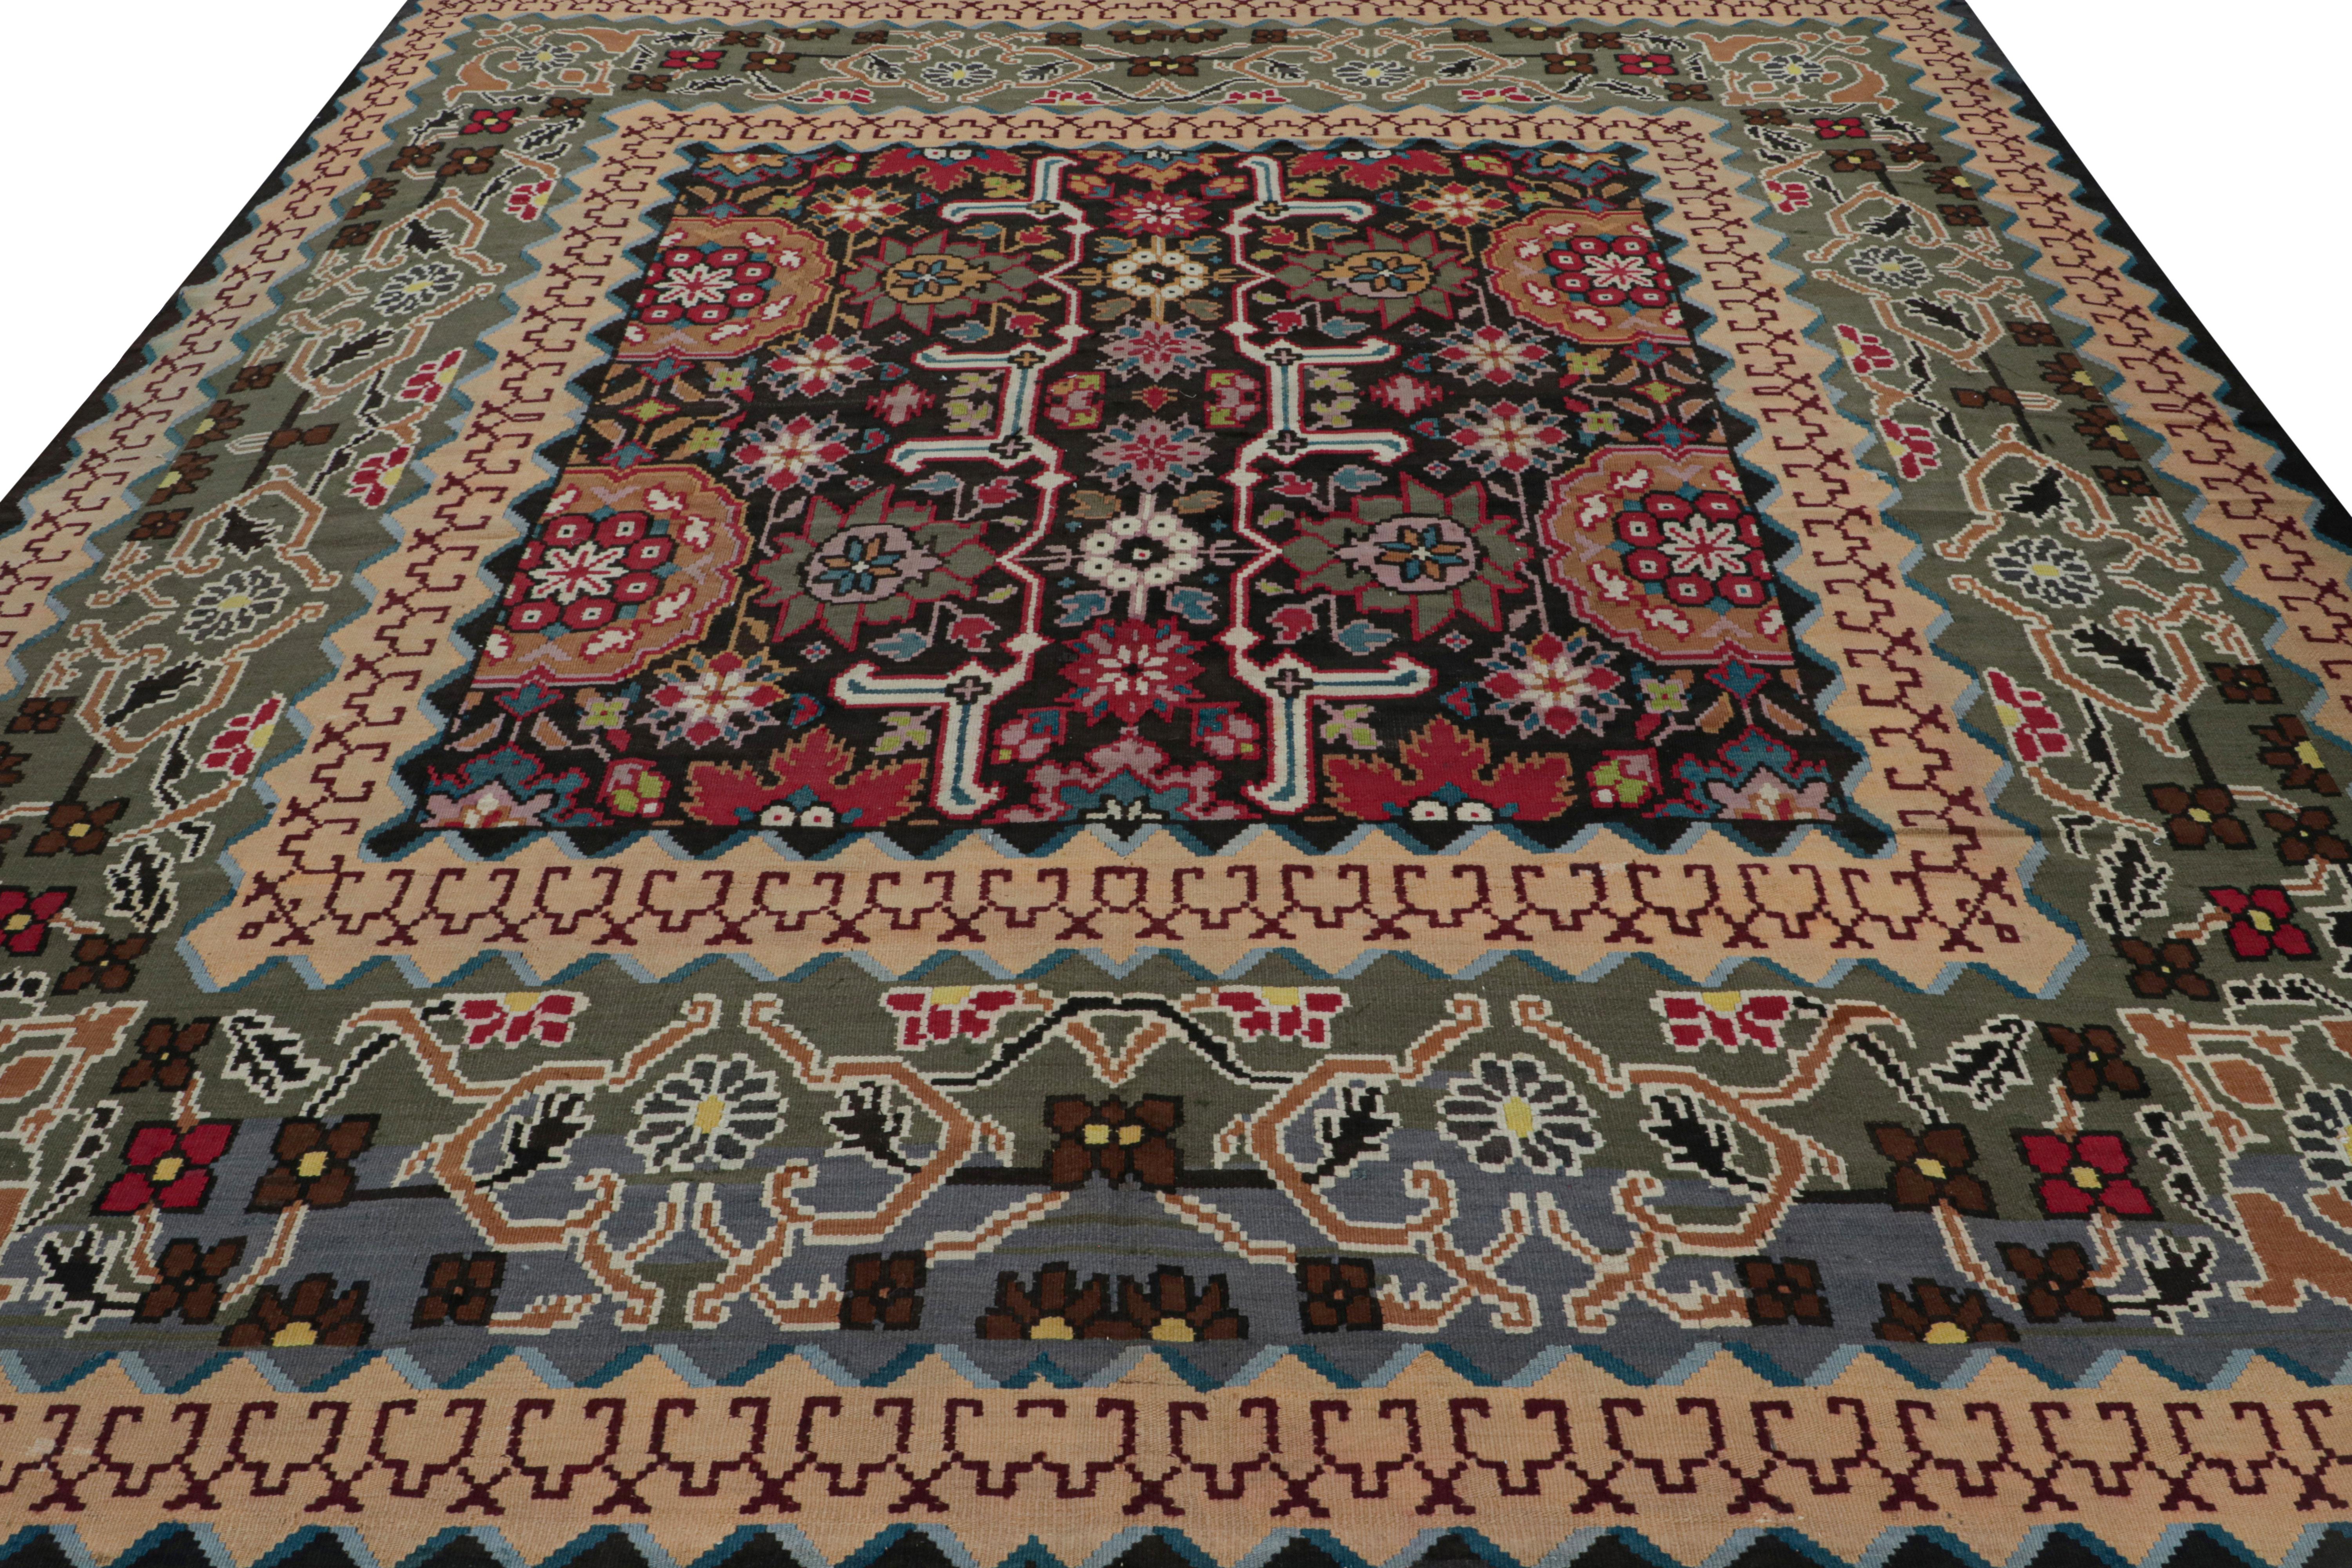 Handwoven in wool, circa 1950-1960, this 10x10 vintage square kilim is believed to originate from Turkey and its design is a rare one with some elements of Balkan design. 

On the Design: 

Drawing on Turkish kilim sensibilities, this archaic piece